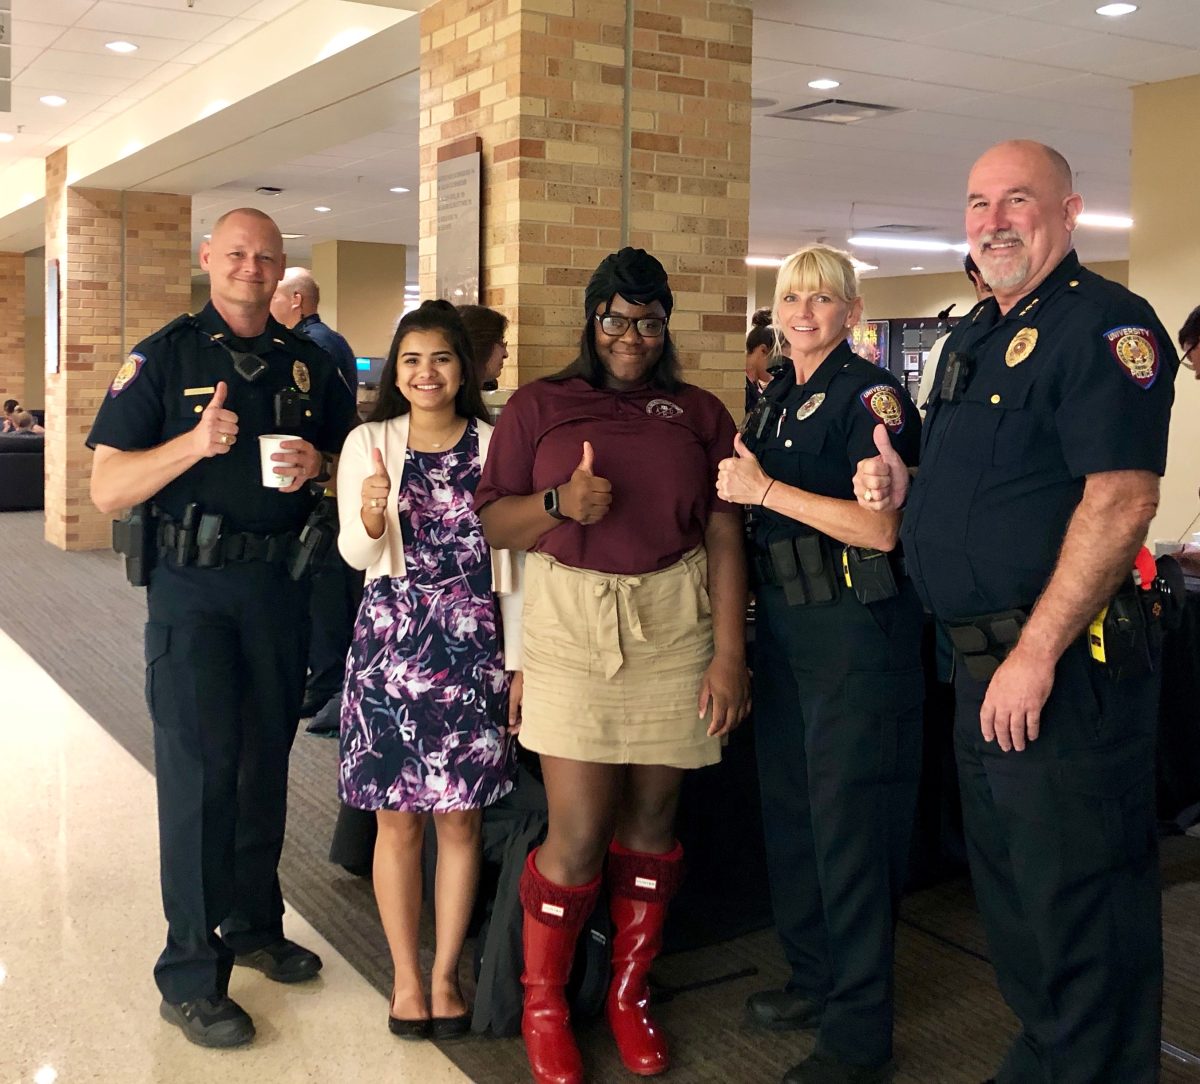 %26%23160%3BCoffee+with+a+Cop+held+April+10%2C+2019+gives+members+of+the+campus+community+to+speak+with+officers+of+the+Texas+A%26amp%3BM+UPD.